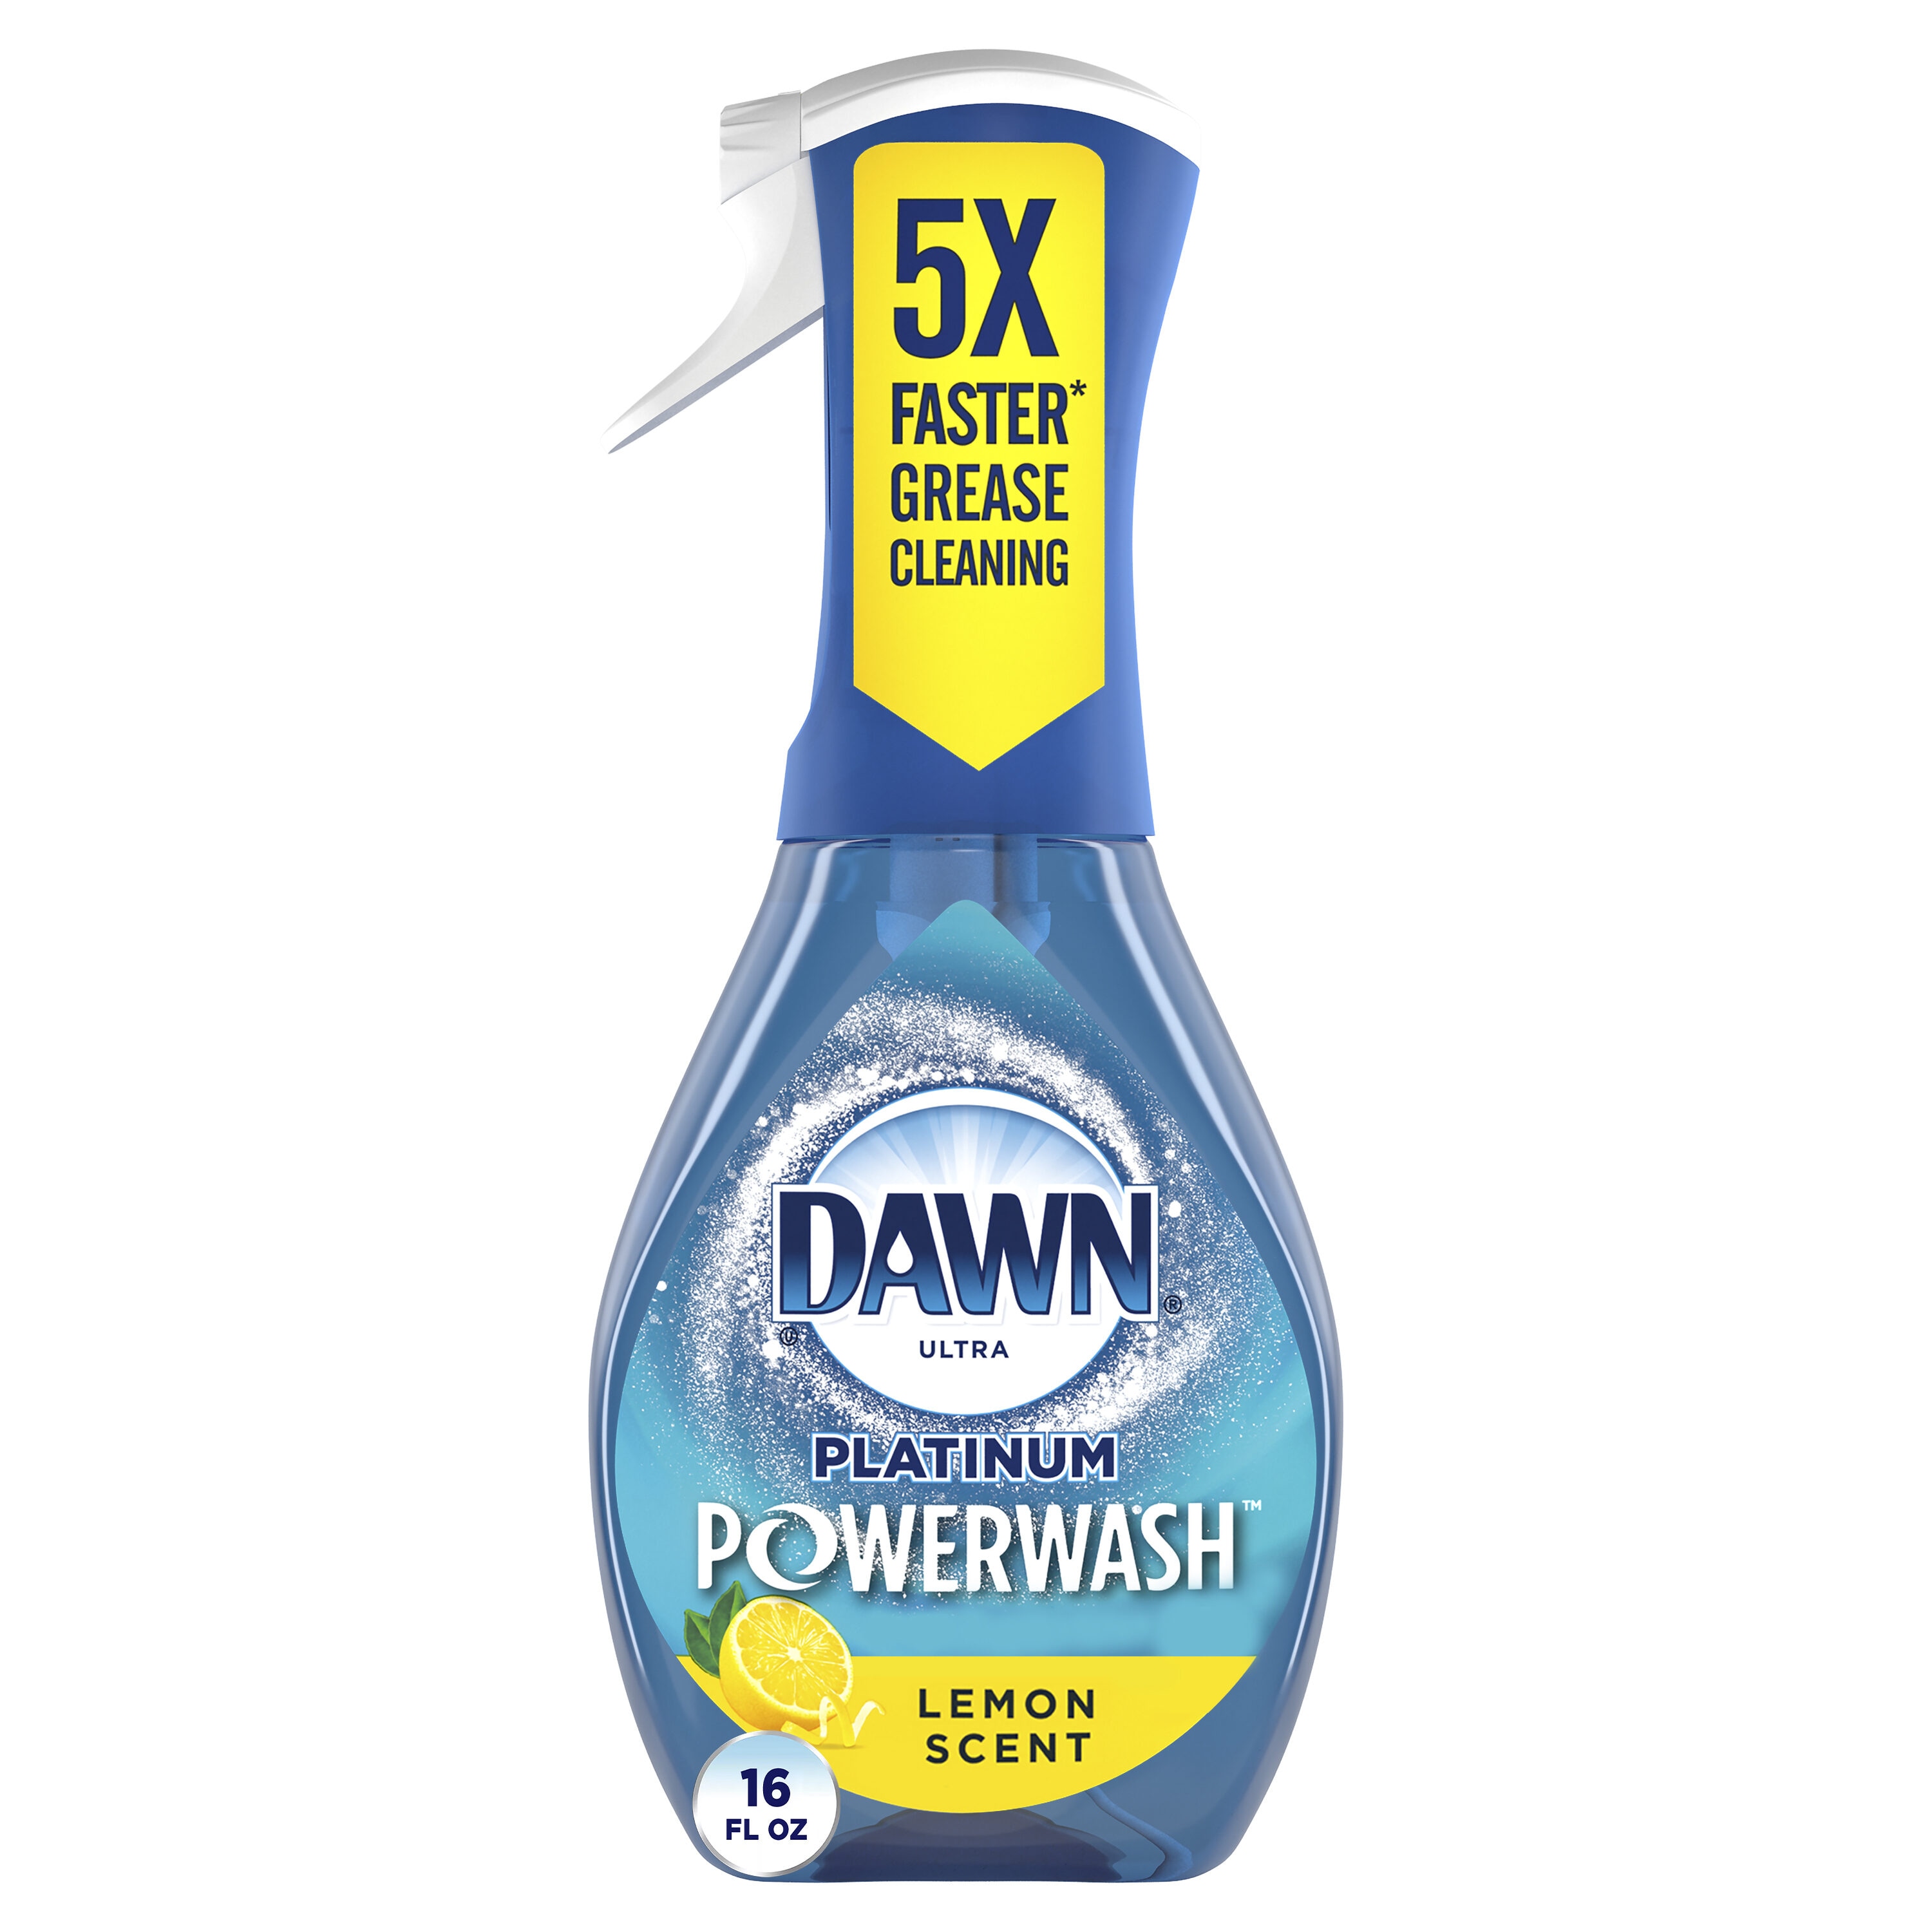 Dawn EZ Squeeze Dish Soap Review - The Cleaning Lady